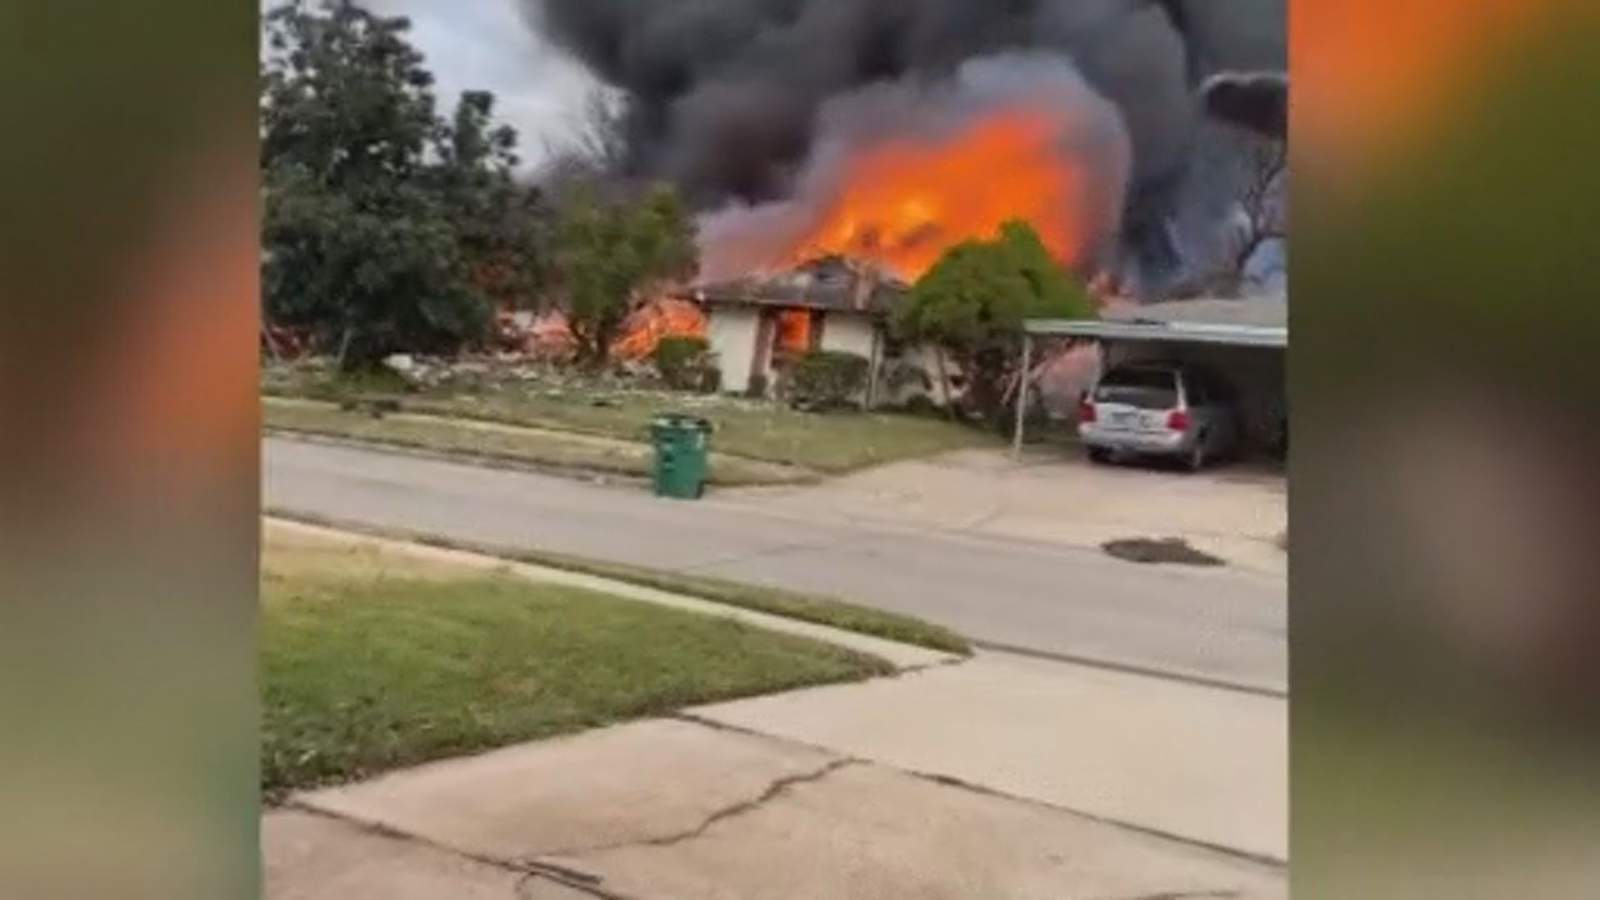 Houston family hopes to rebuild after explosion destroys home of 51 years